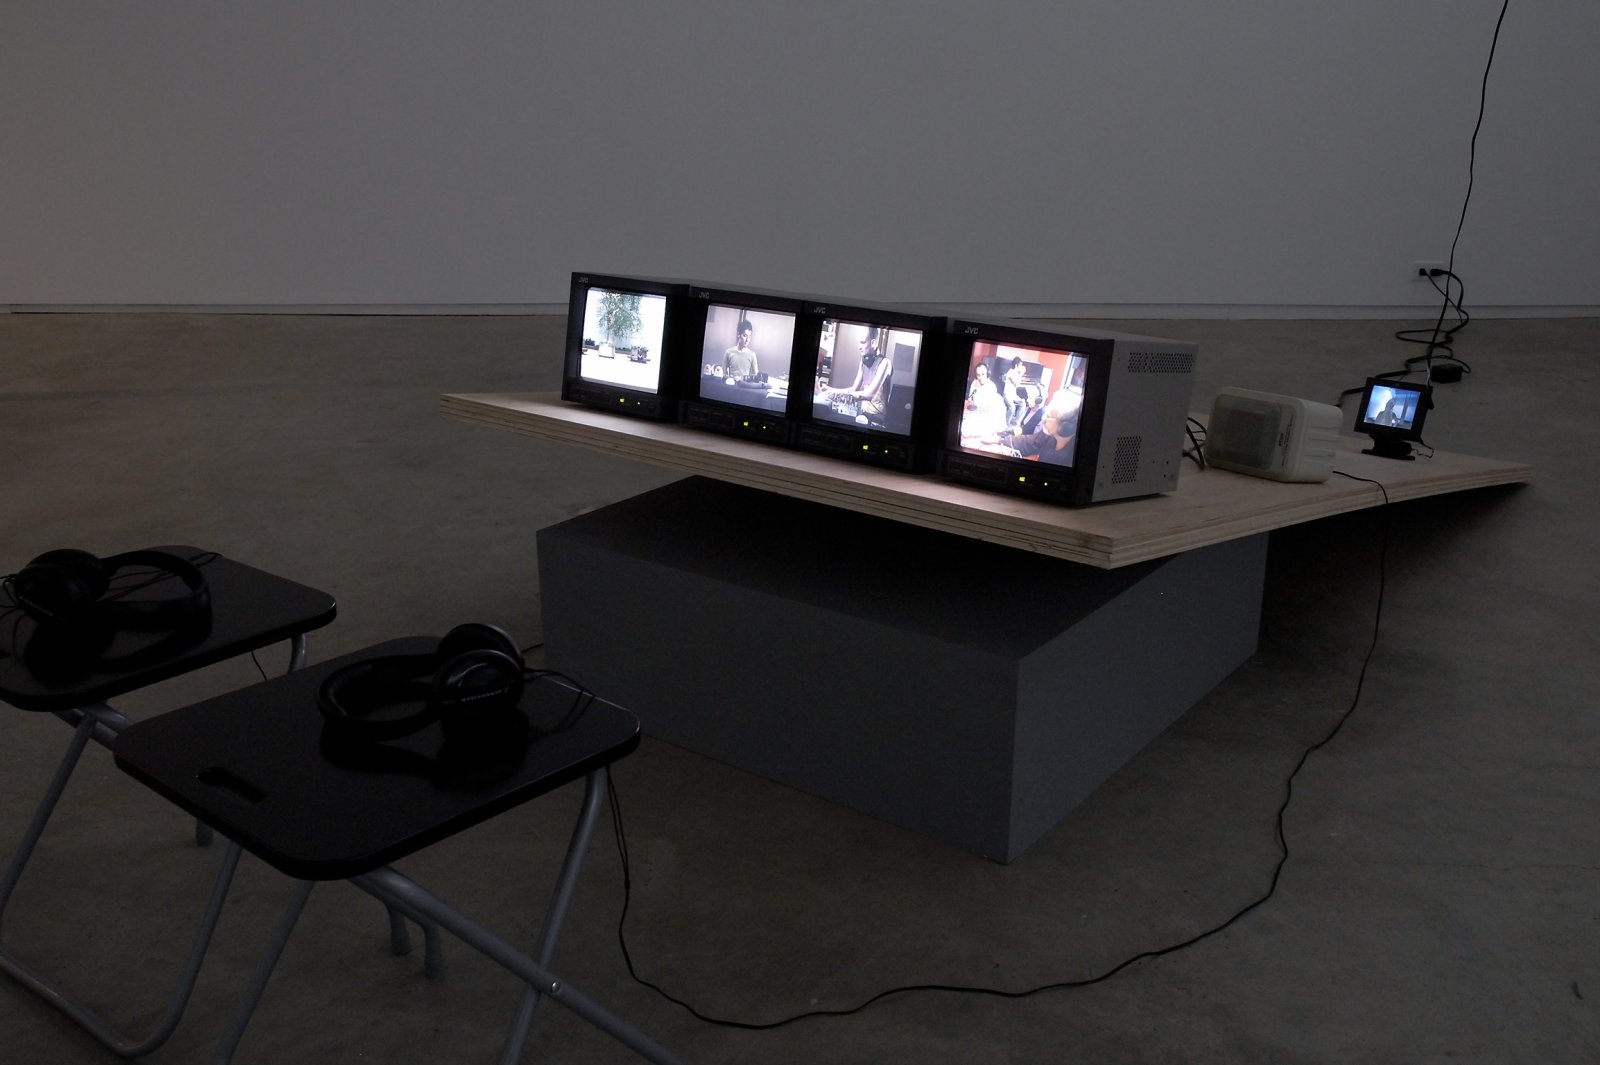 Judy Radul, Five Pieces of Relation: Attention to the people in the plaza, Use both hands to respond by ringing, Anxious causality laptop version, Animal Voices on the air, On the verge of appearing live, 2006, mixed media, 32 minutes by Judy Radul